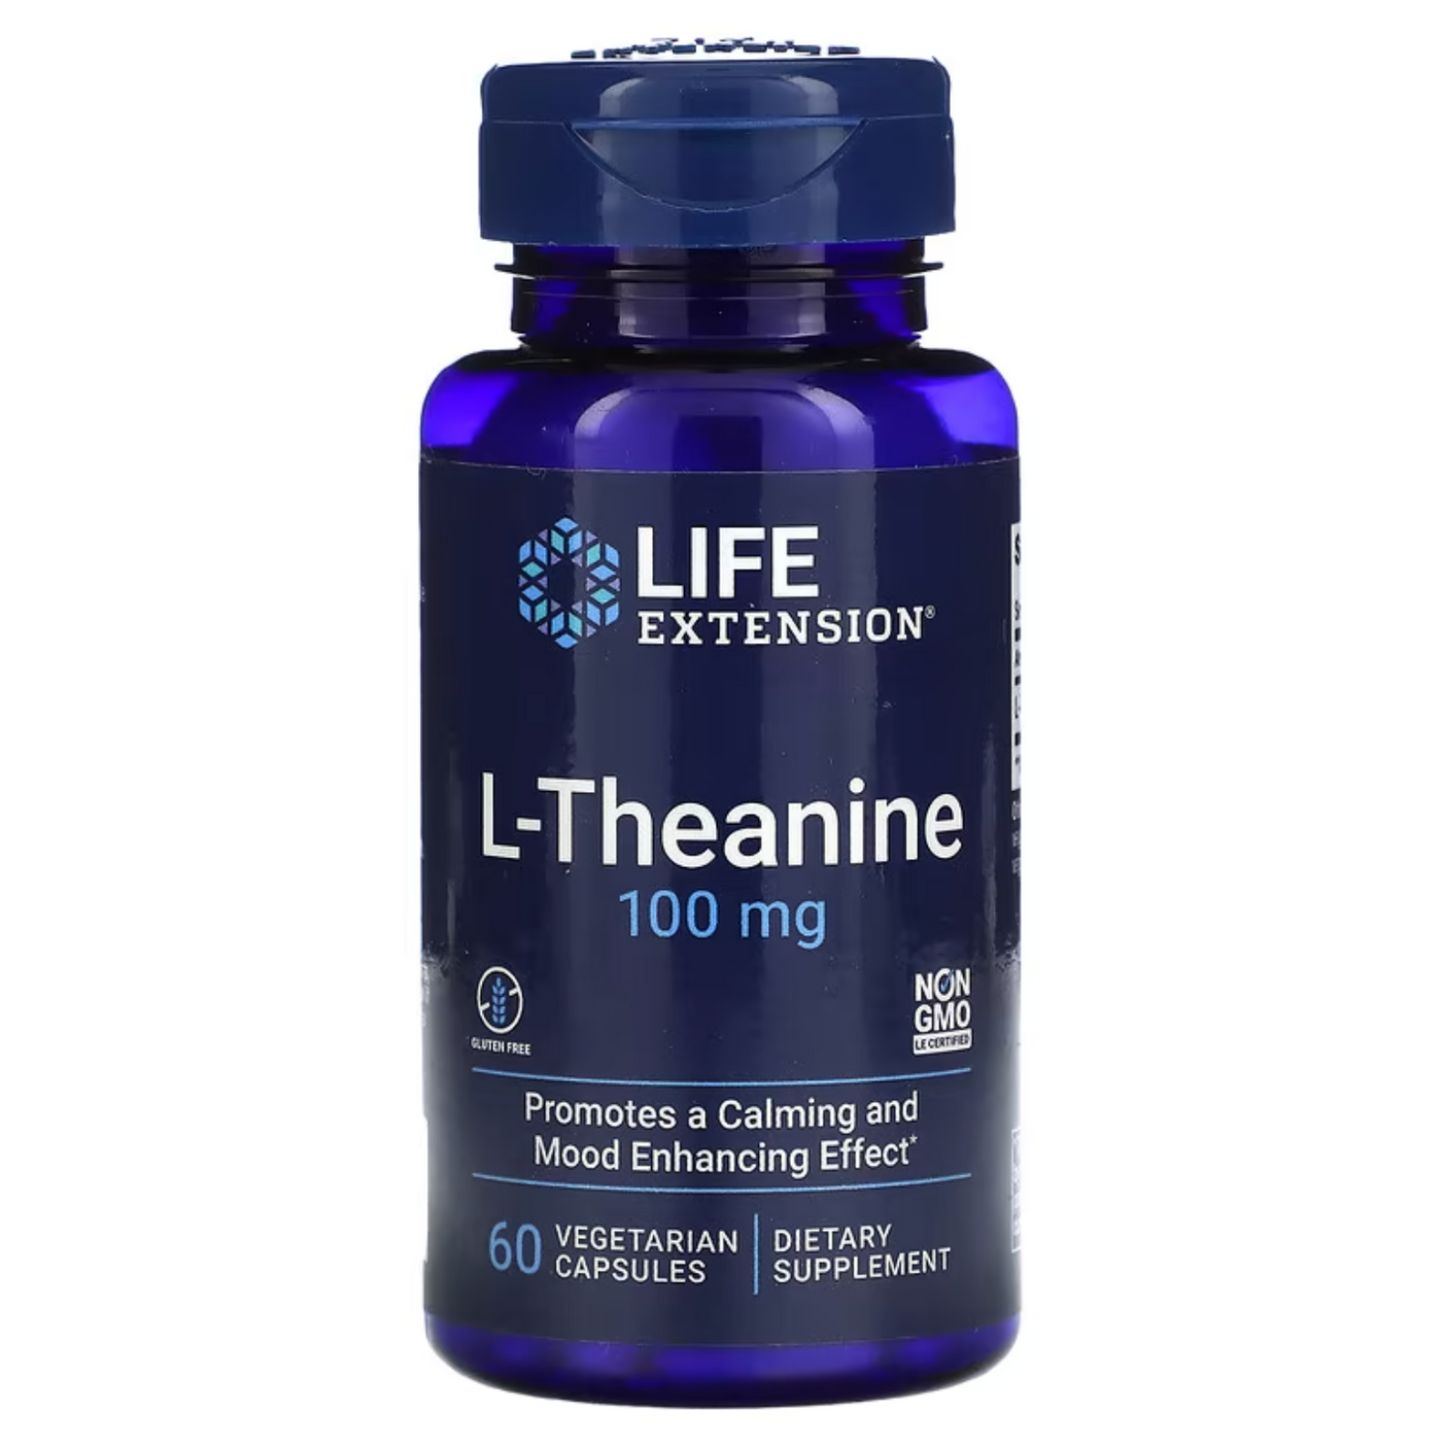 Life Extension - L-Theanine, 100 mg - 60 Veg Capsules